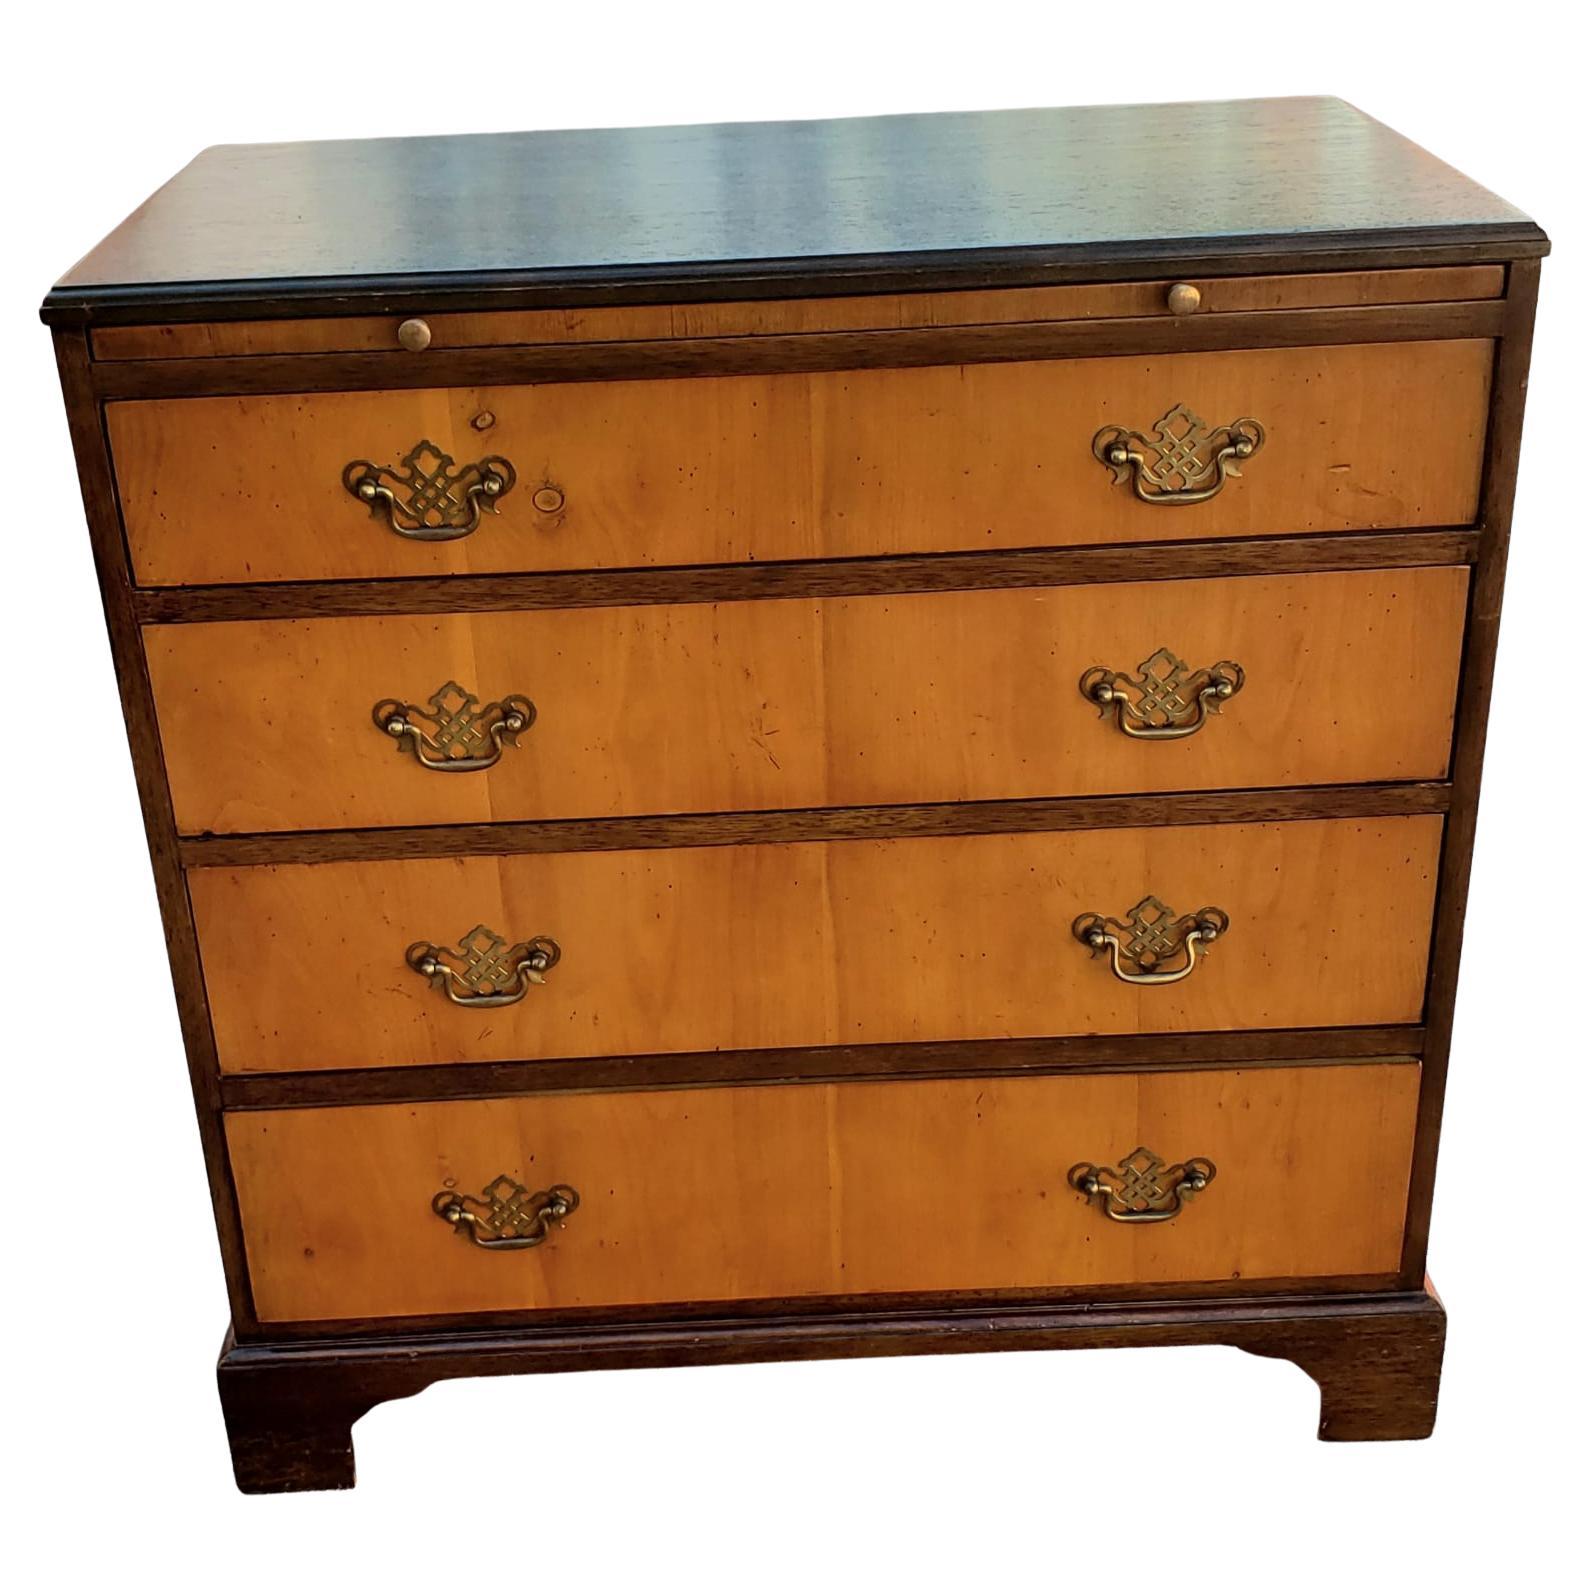 Rare 1940s vintage Baker Furniture satinwood and walnut chest with pull out tray. Features 4 dovetailed drawers in smooth working condition. Comes with original hardware. Dark walnut sides and top. Satinwood front. Very good condition.
Measures